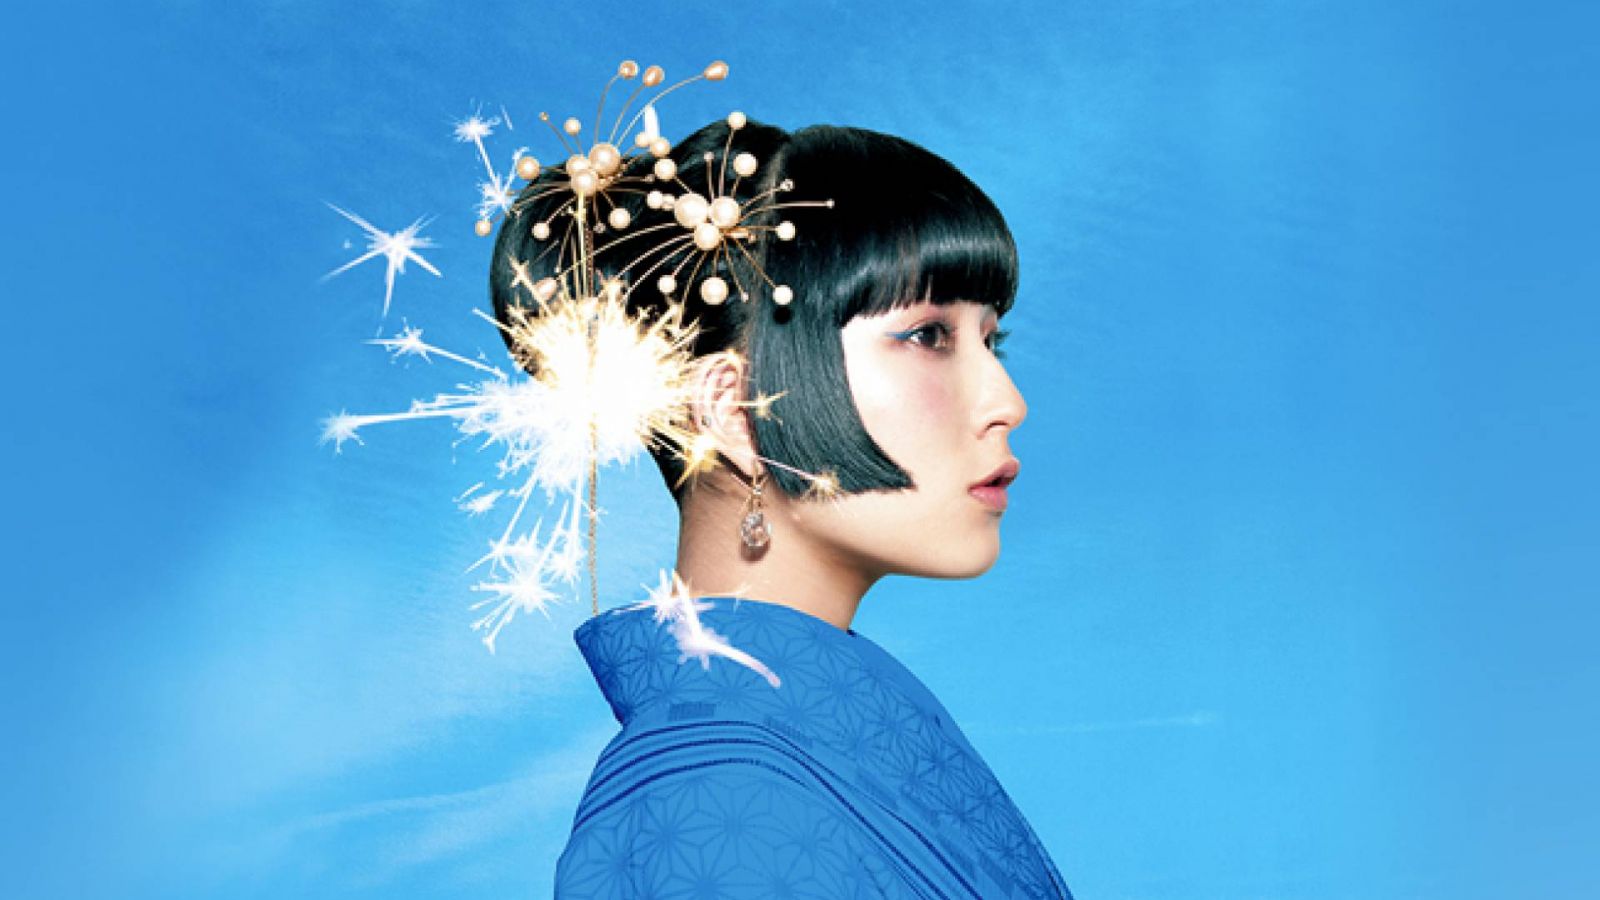 New Album from DAOKO © TOY’ S FACTORY INC. ALL RIGHTS RESERVED.